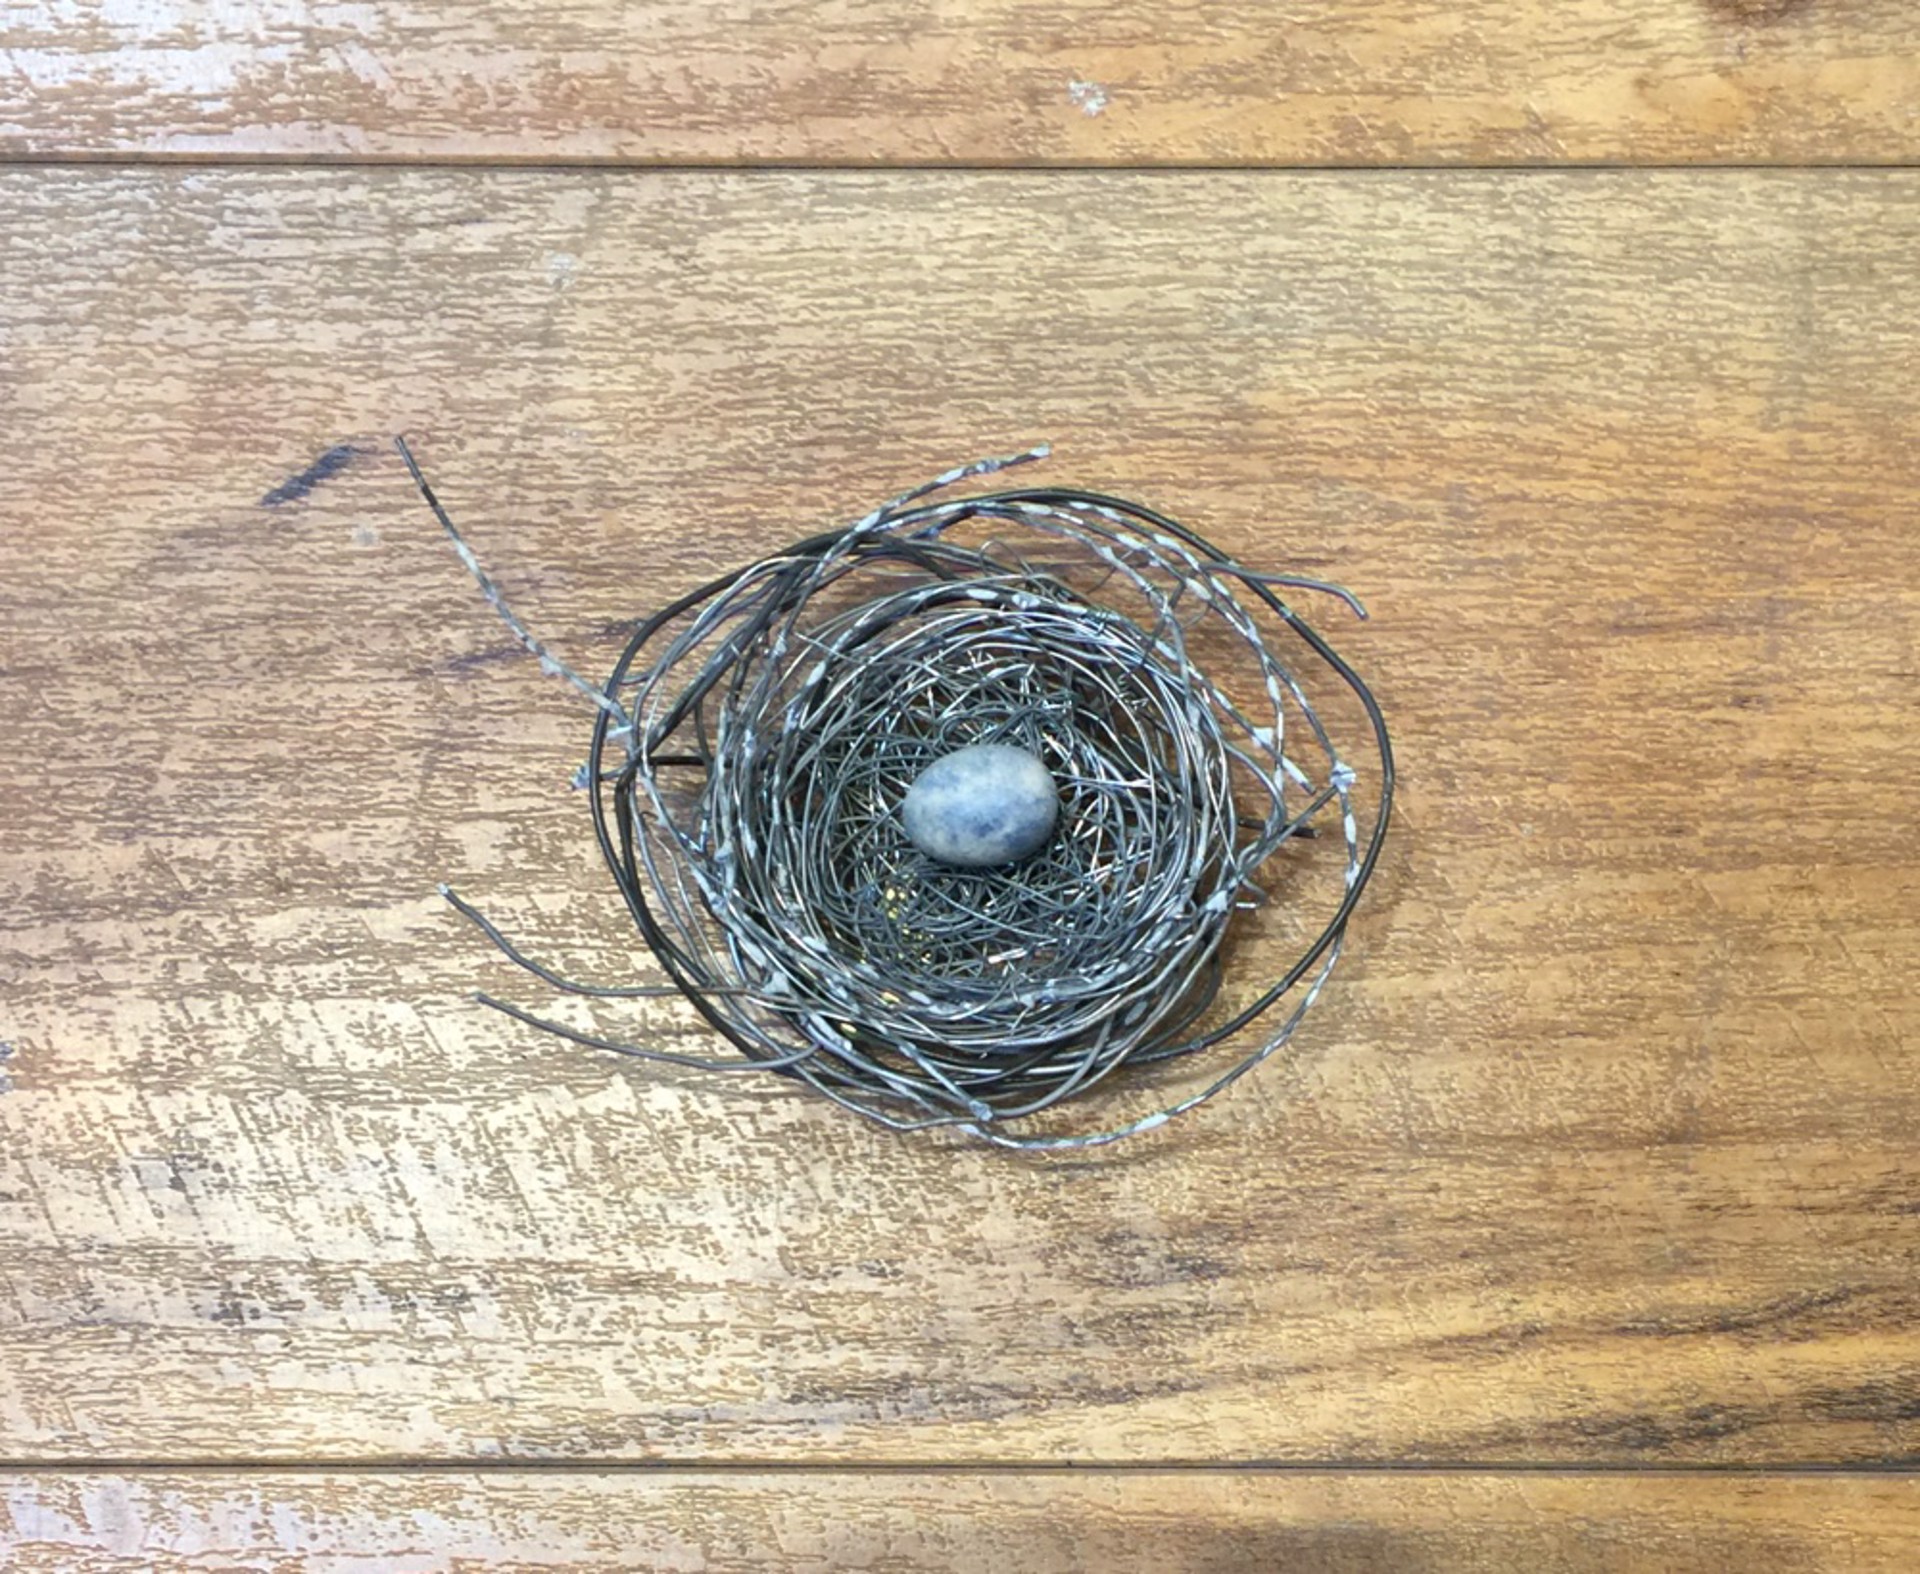 Hand Woven Wire Nest With 1 Grey Ceramic Eggs - 1304 by Phil Lichtenhan